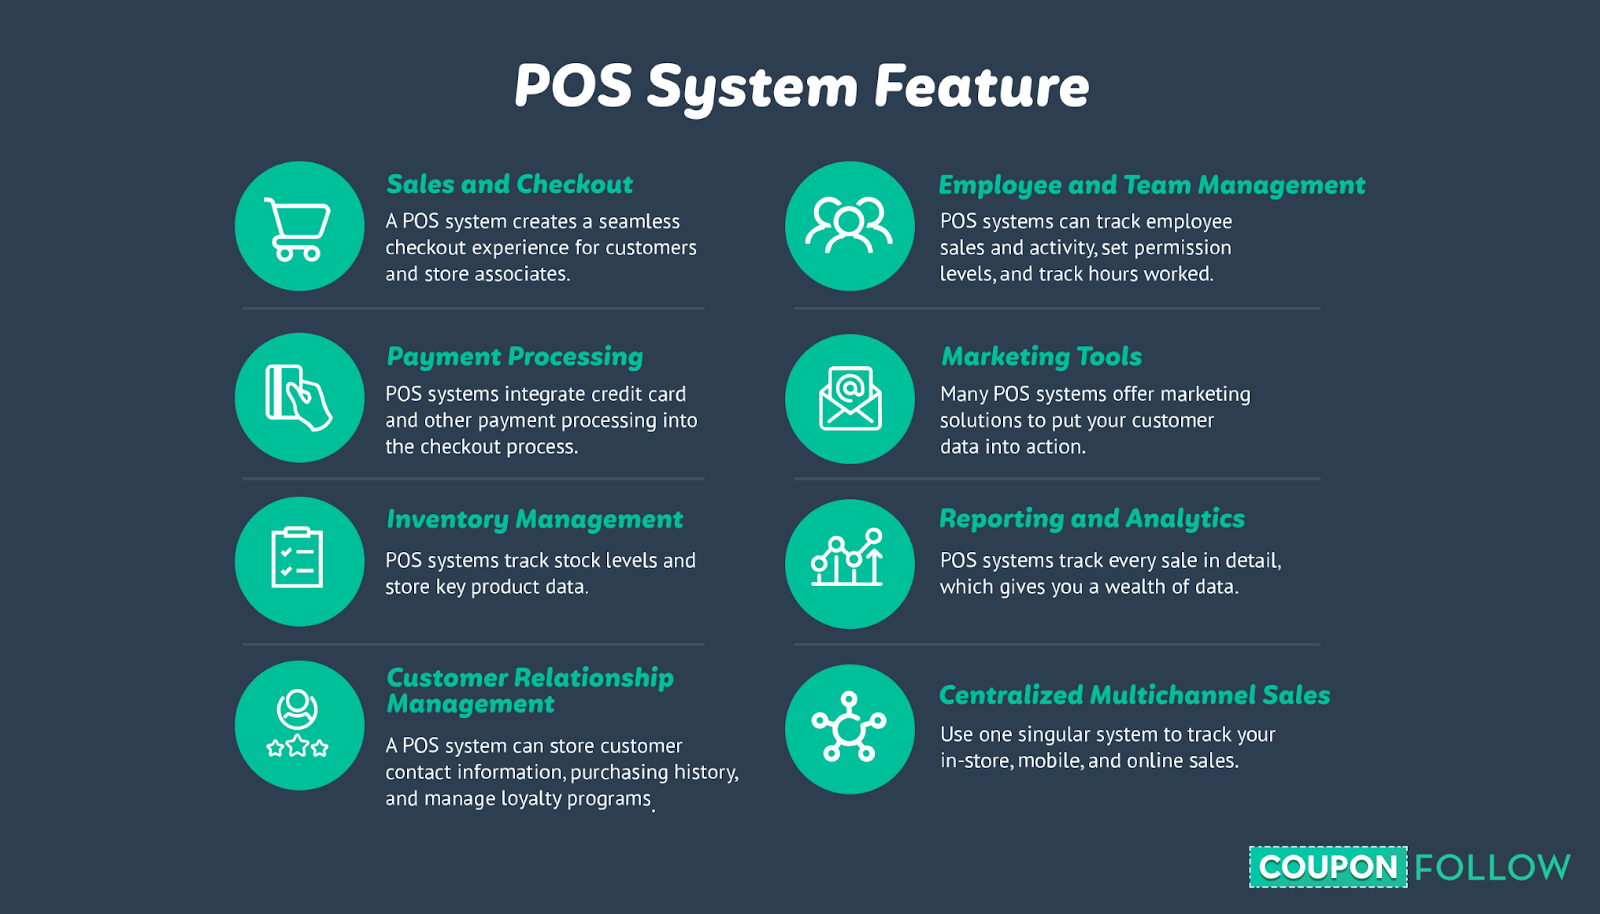 Features to look out for when choosing a POS system